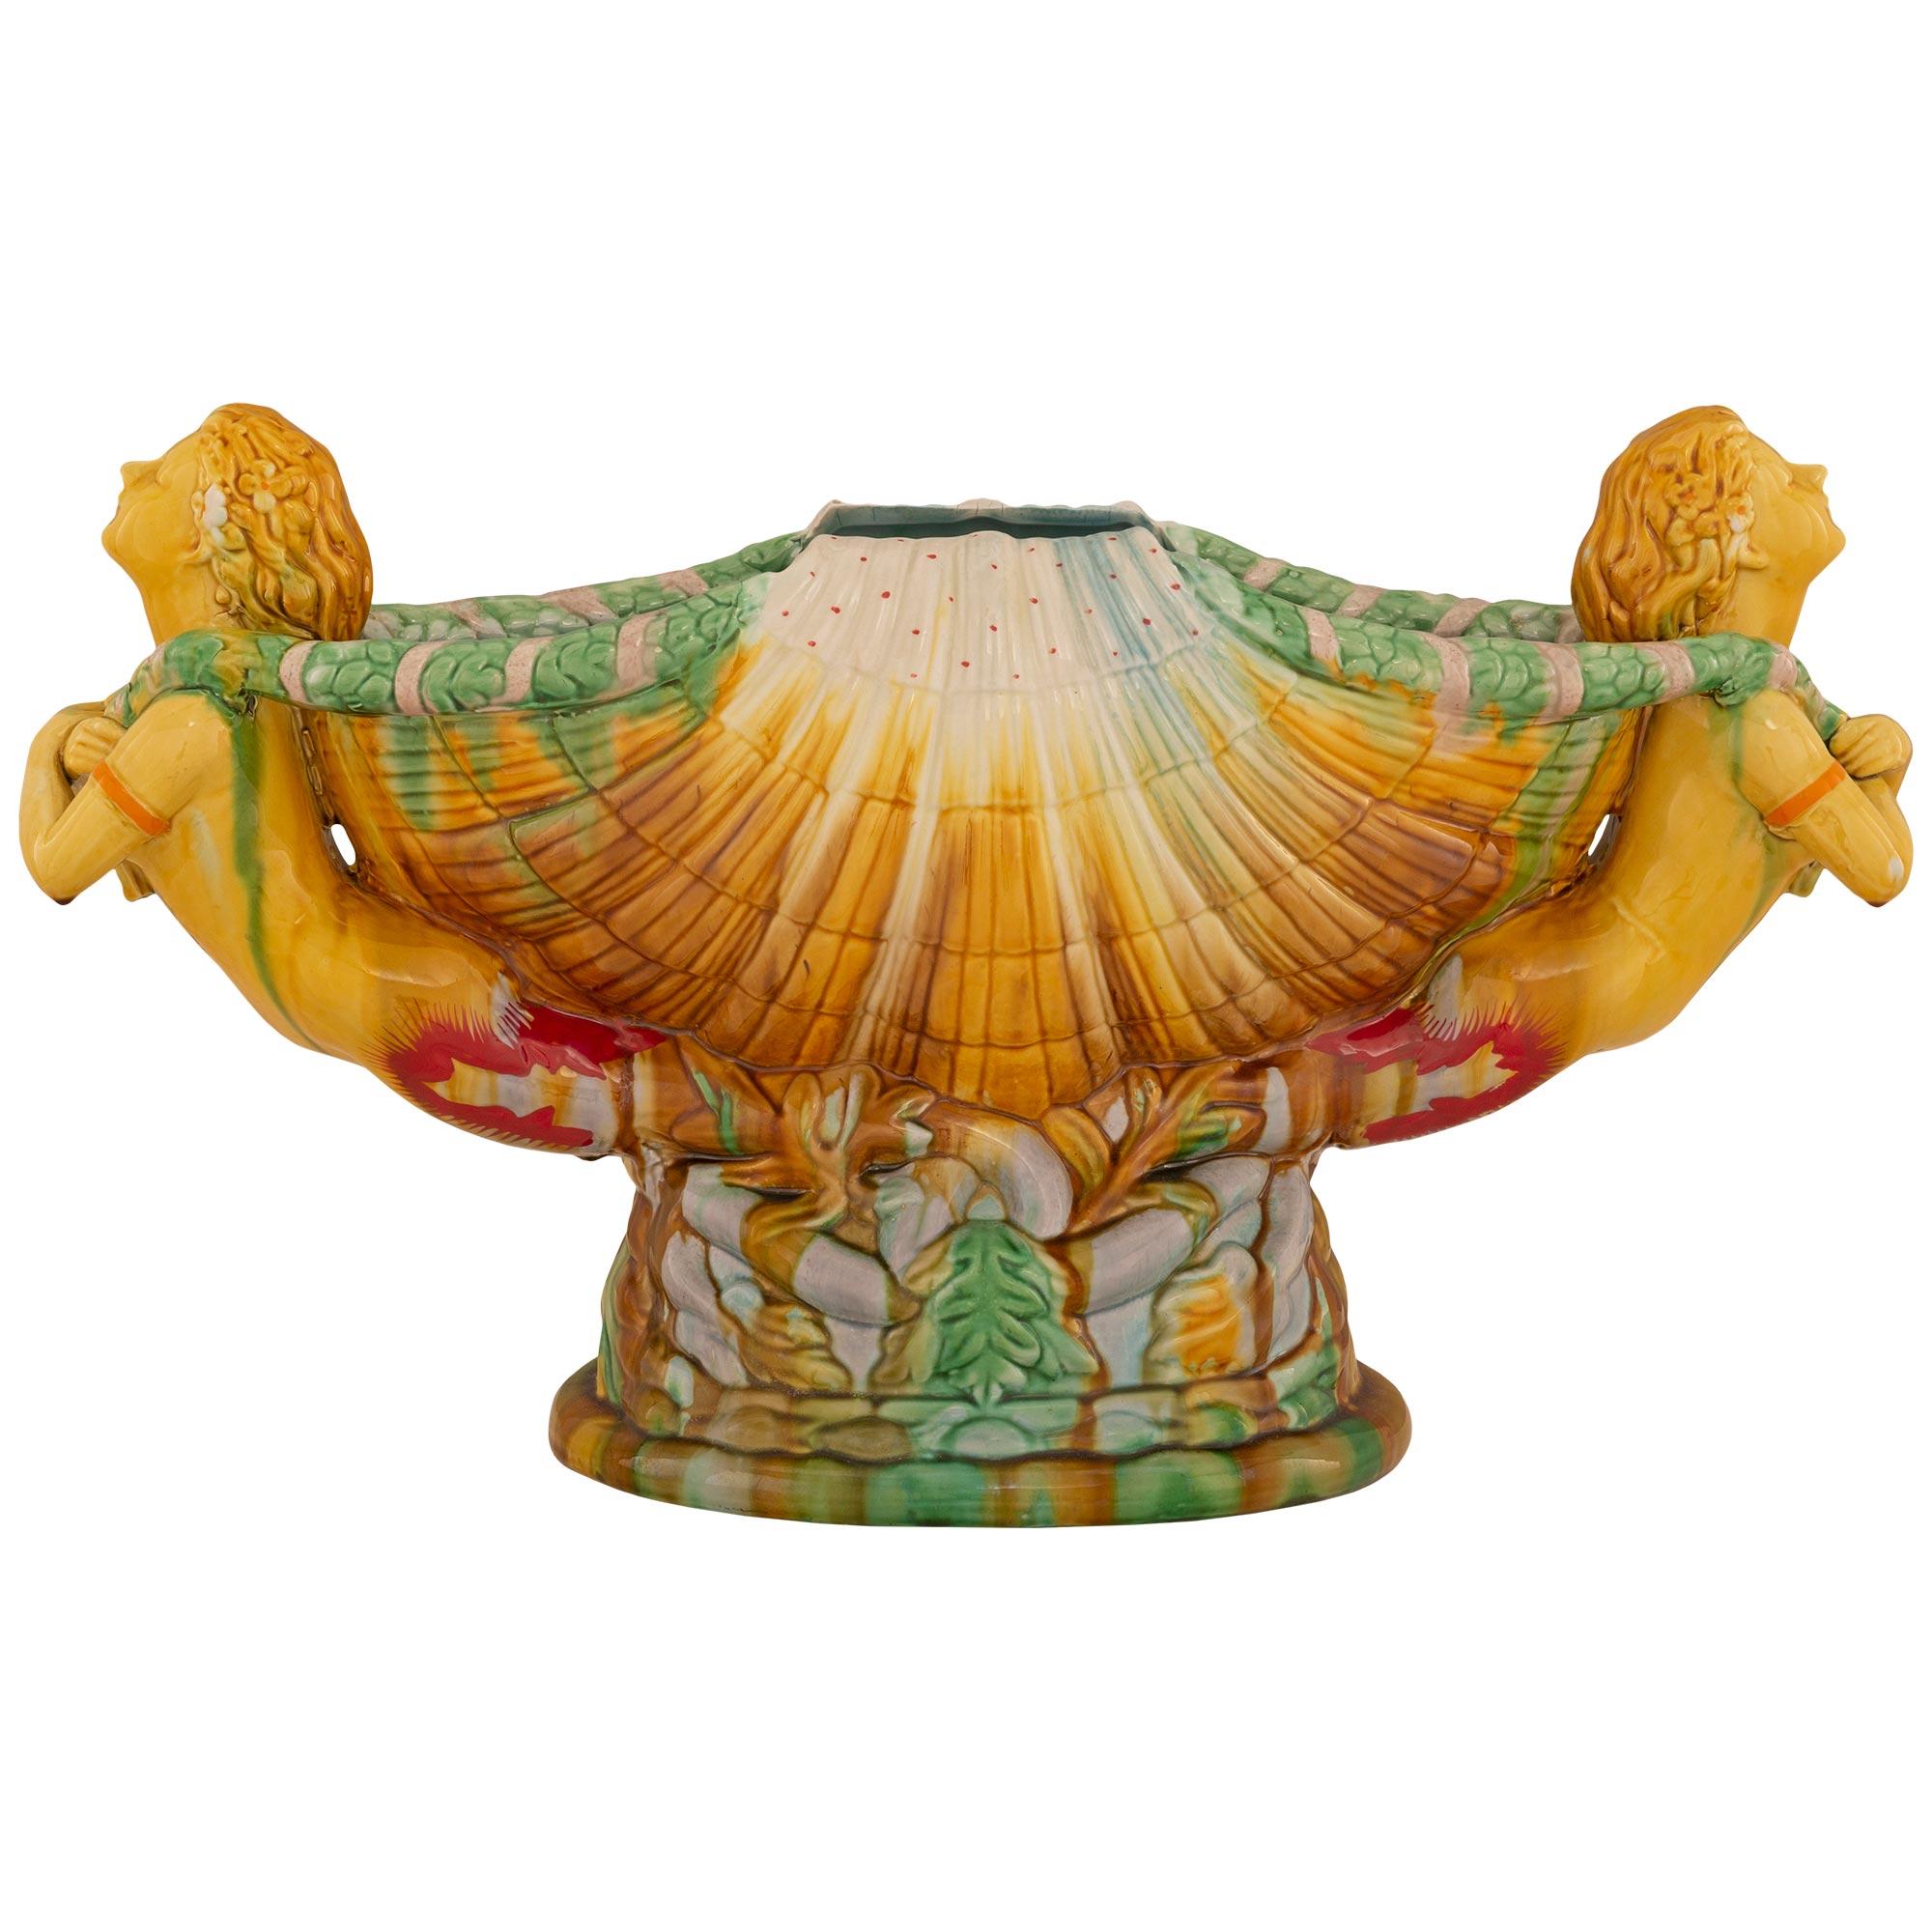 A striking and most decorative Italian turn of the century Majolica porcelain centerpiece bowl. The centerpiece is raised by an oblong base with a fine rock like design and fine intertwining patterns. The bowl displays a stunning and most decorative